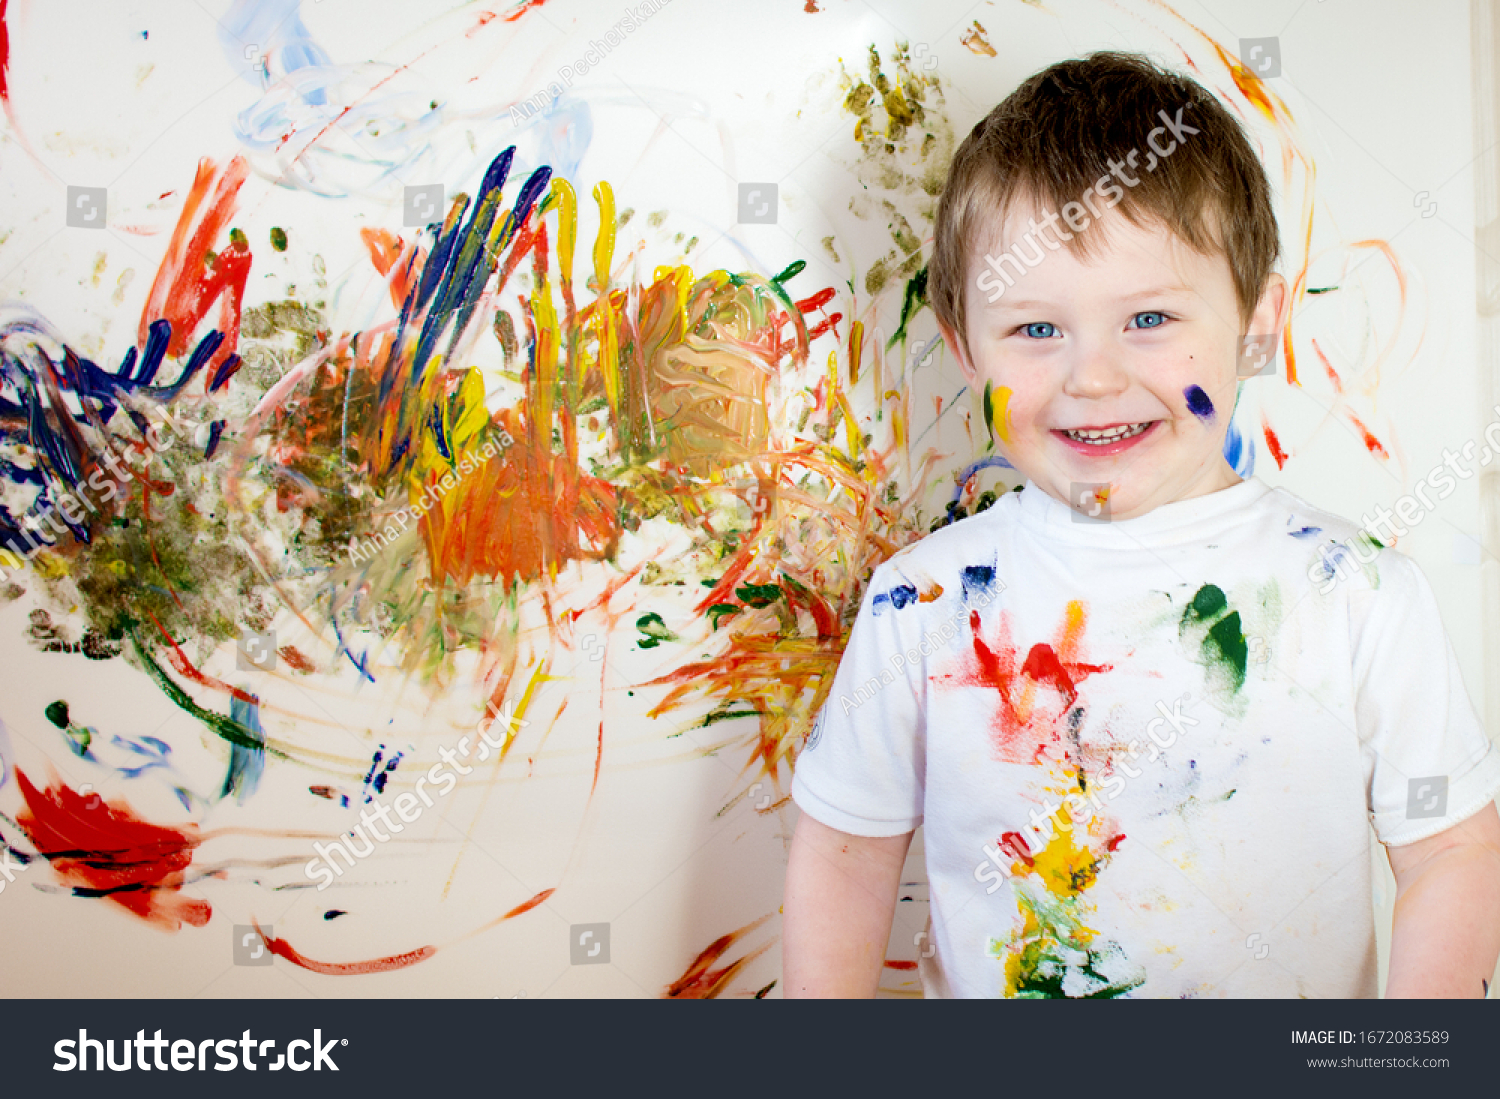 Cheerful happy blue-eyed child in a white T-shirt, painted and stained clothes. The boy looks into the frame, smiles. #1672083589